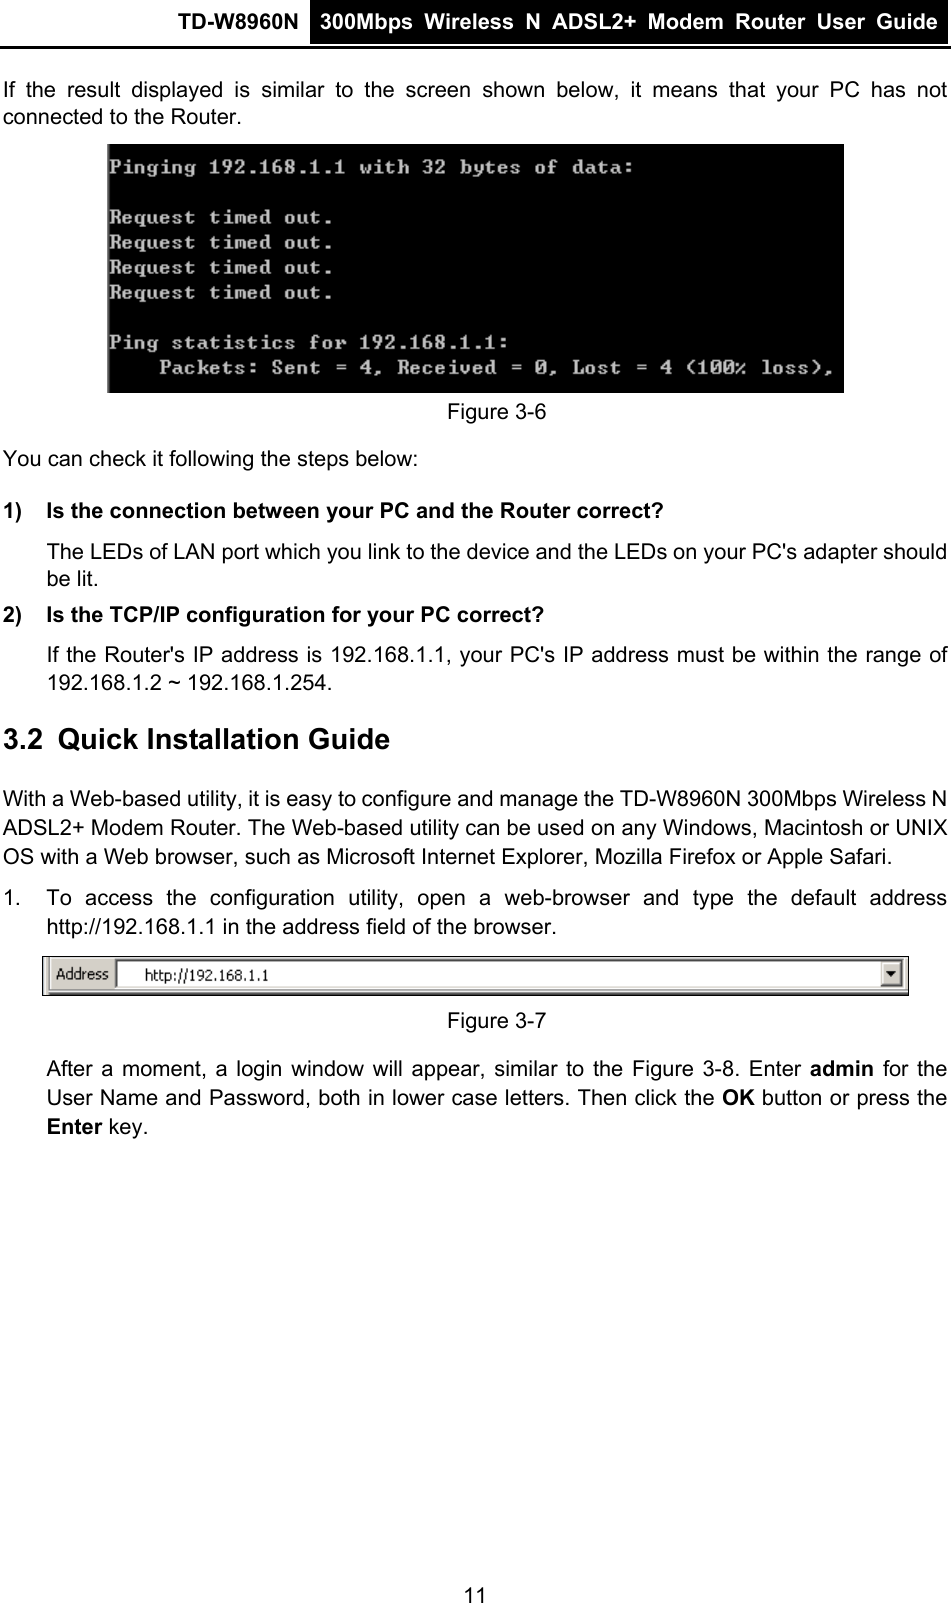 TD-W8960N  300Mbps Wireless N ADSL2+ Modem Router User Guide  If the result displayed is similar to the screen shown below, it means that your PC has not connected to the Router.  Figure 3-6 You can check it following the steps below: 1)  Is the connection between your PC and the Router correct? The LEDs of LAN port which you link to the device and the LEDs on your PC&apos;s adapter should be lit. 2)  Is the TCP/IP configuration for your PC correct? If the Router&apos;s IP address is 192.168.1.1, your PC&apos;s IP address must be within the range of 192.168.1.2 ~ 192.168.1.254. 3.2  Quick Installation Guide With a Web-based utility, it is easy to configure and manage the TD-W8960N 300Mbps Wireless N ADSL2+ Modem Router. The Web-based utility can be used on any Windows, Macintosh or UNIX OS with a Web browser, such as Microsoft Internet Explorer, Mozilla Firefox or Apple Safari. 1.  To access the configuration utility, open a web-browser and type the default address http://192.168.1.1 in the address field of the browser.  Figure 3-7 After a moment, a login window will appear, similar to the Figure 3-8. Enter admin  for the User Name and Password, both in lower case letters. Then click the OK button or press the Enter key. 11 